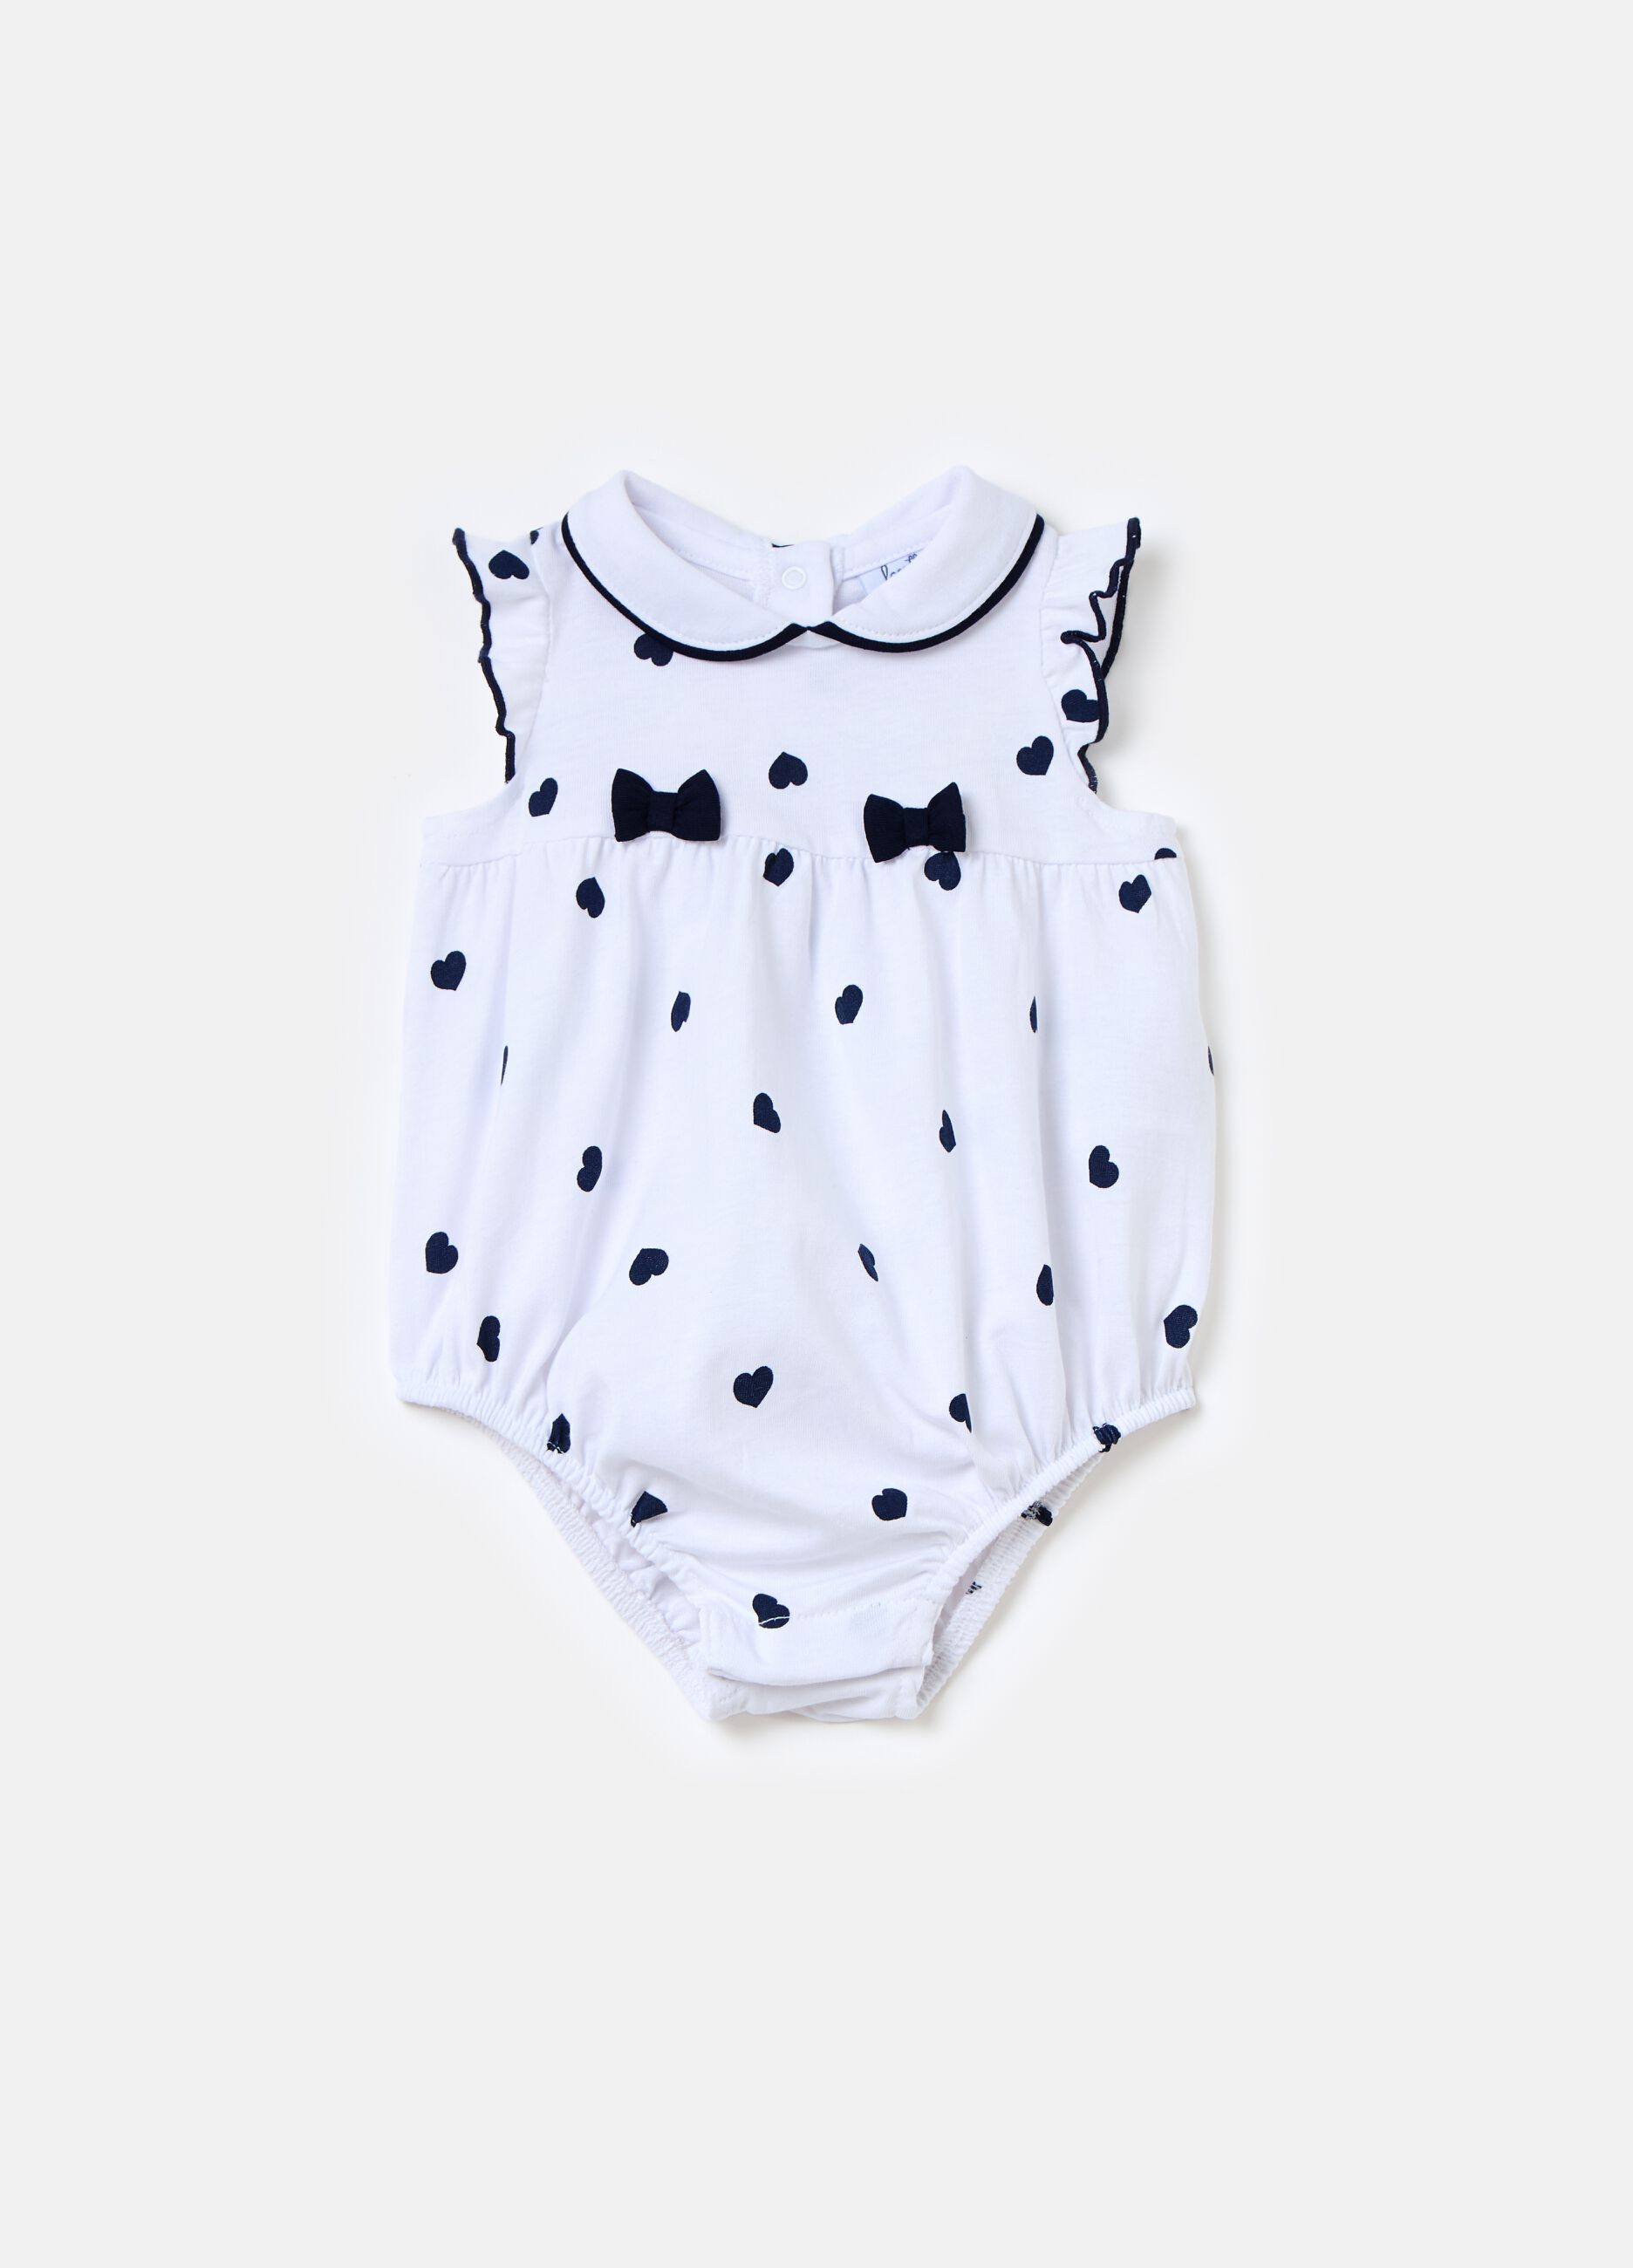 Organic cotton romper suit with hearts print